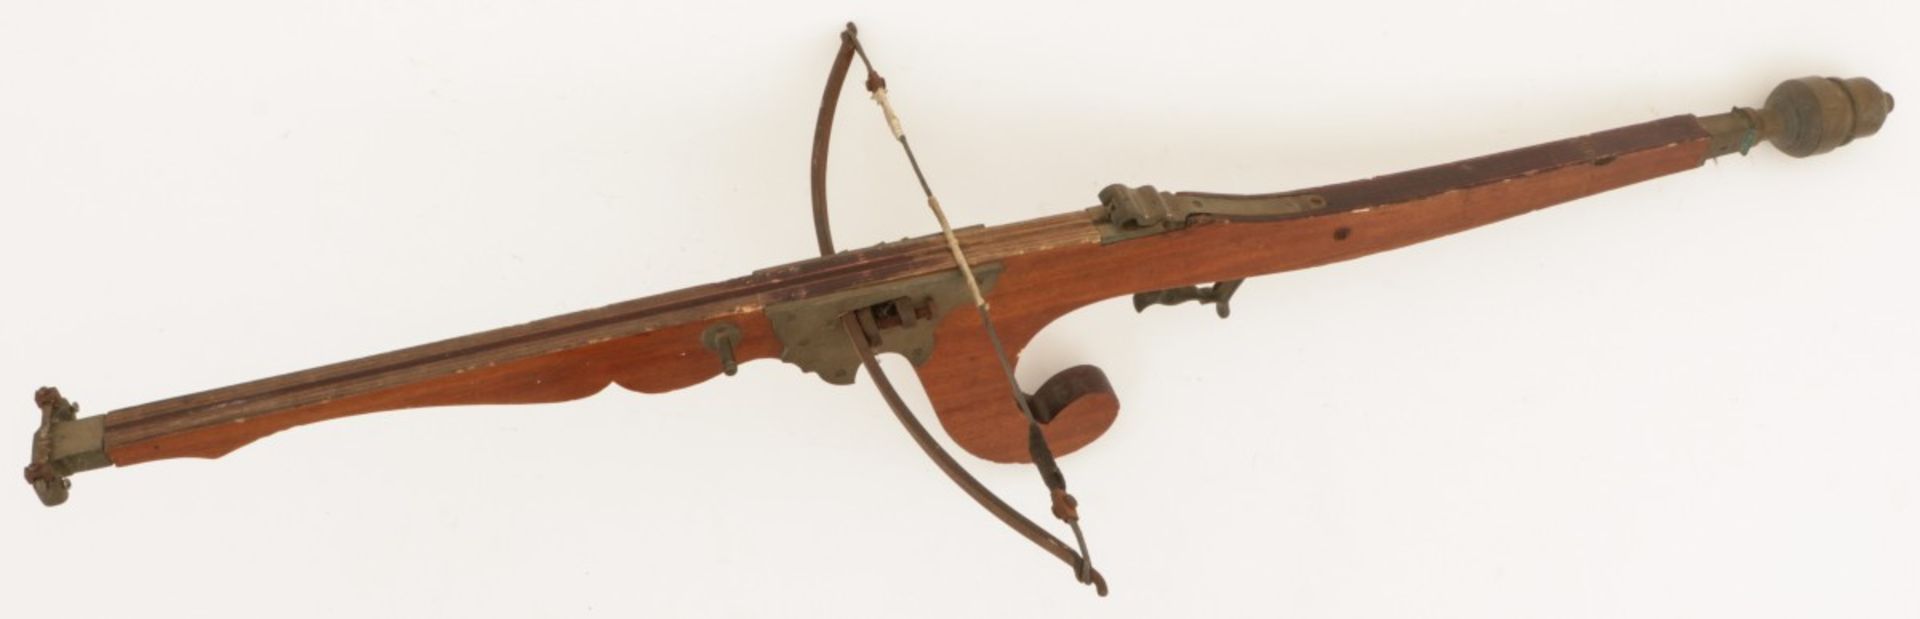 A wooden/ iron crossbow, 20th century.